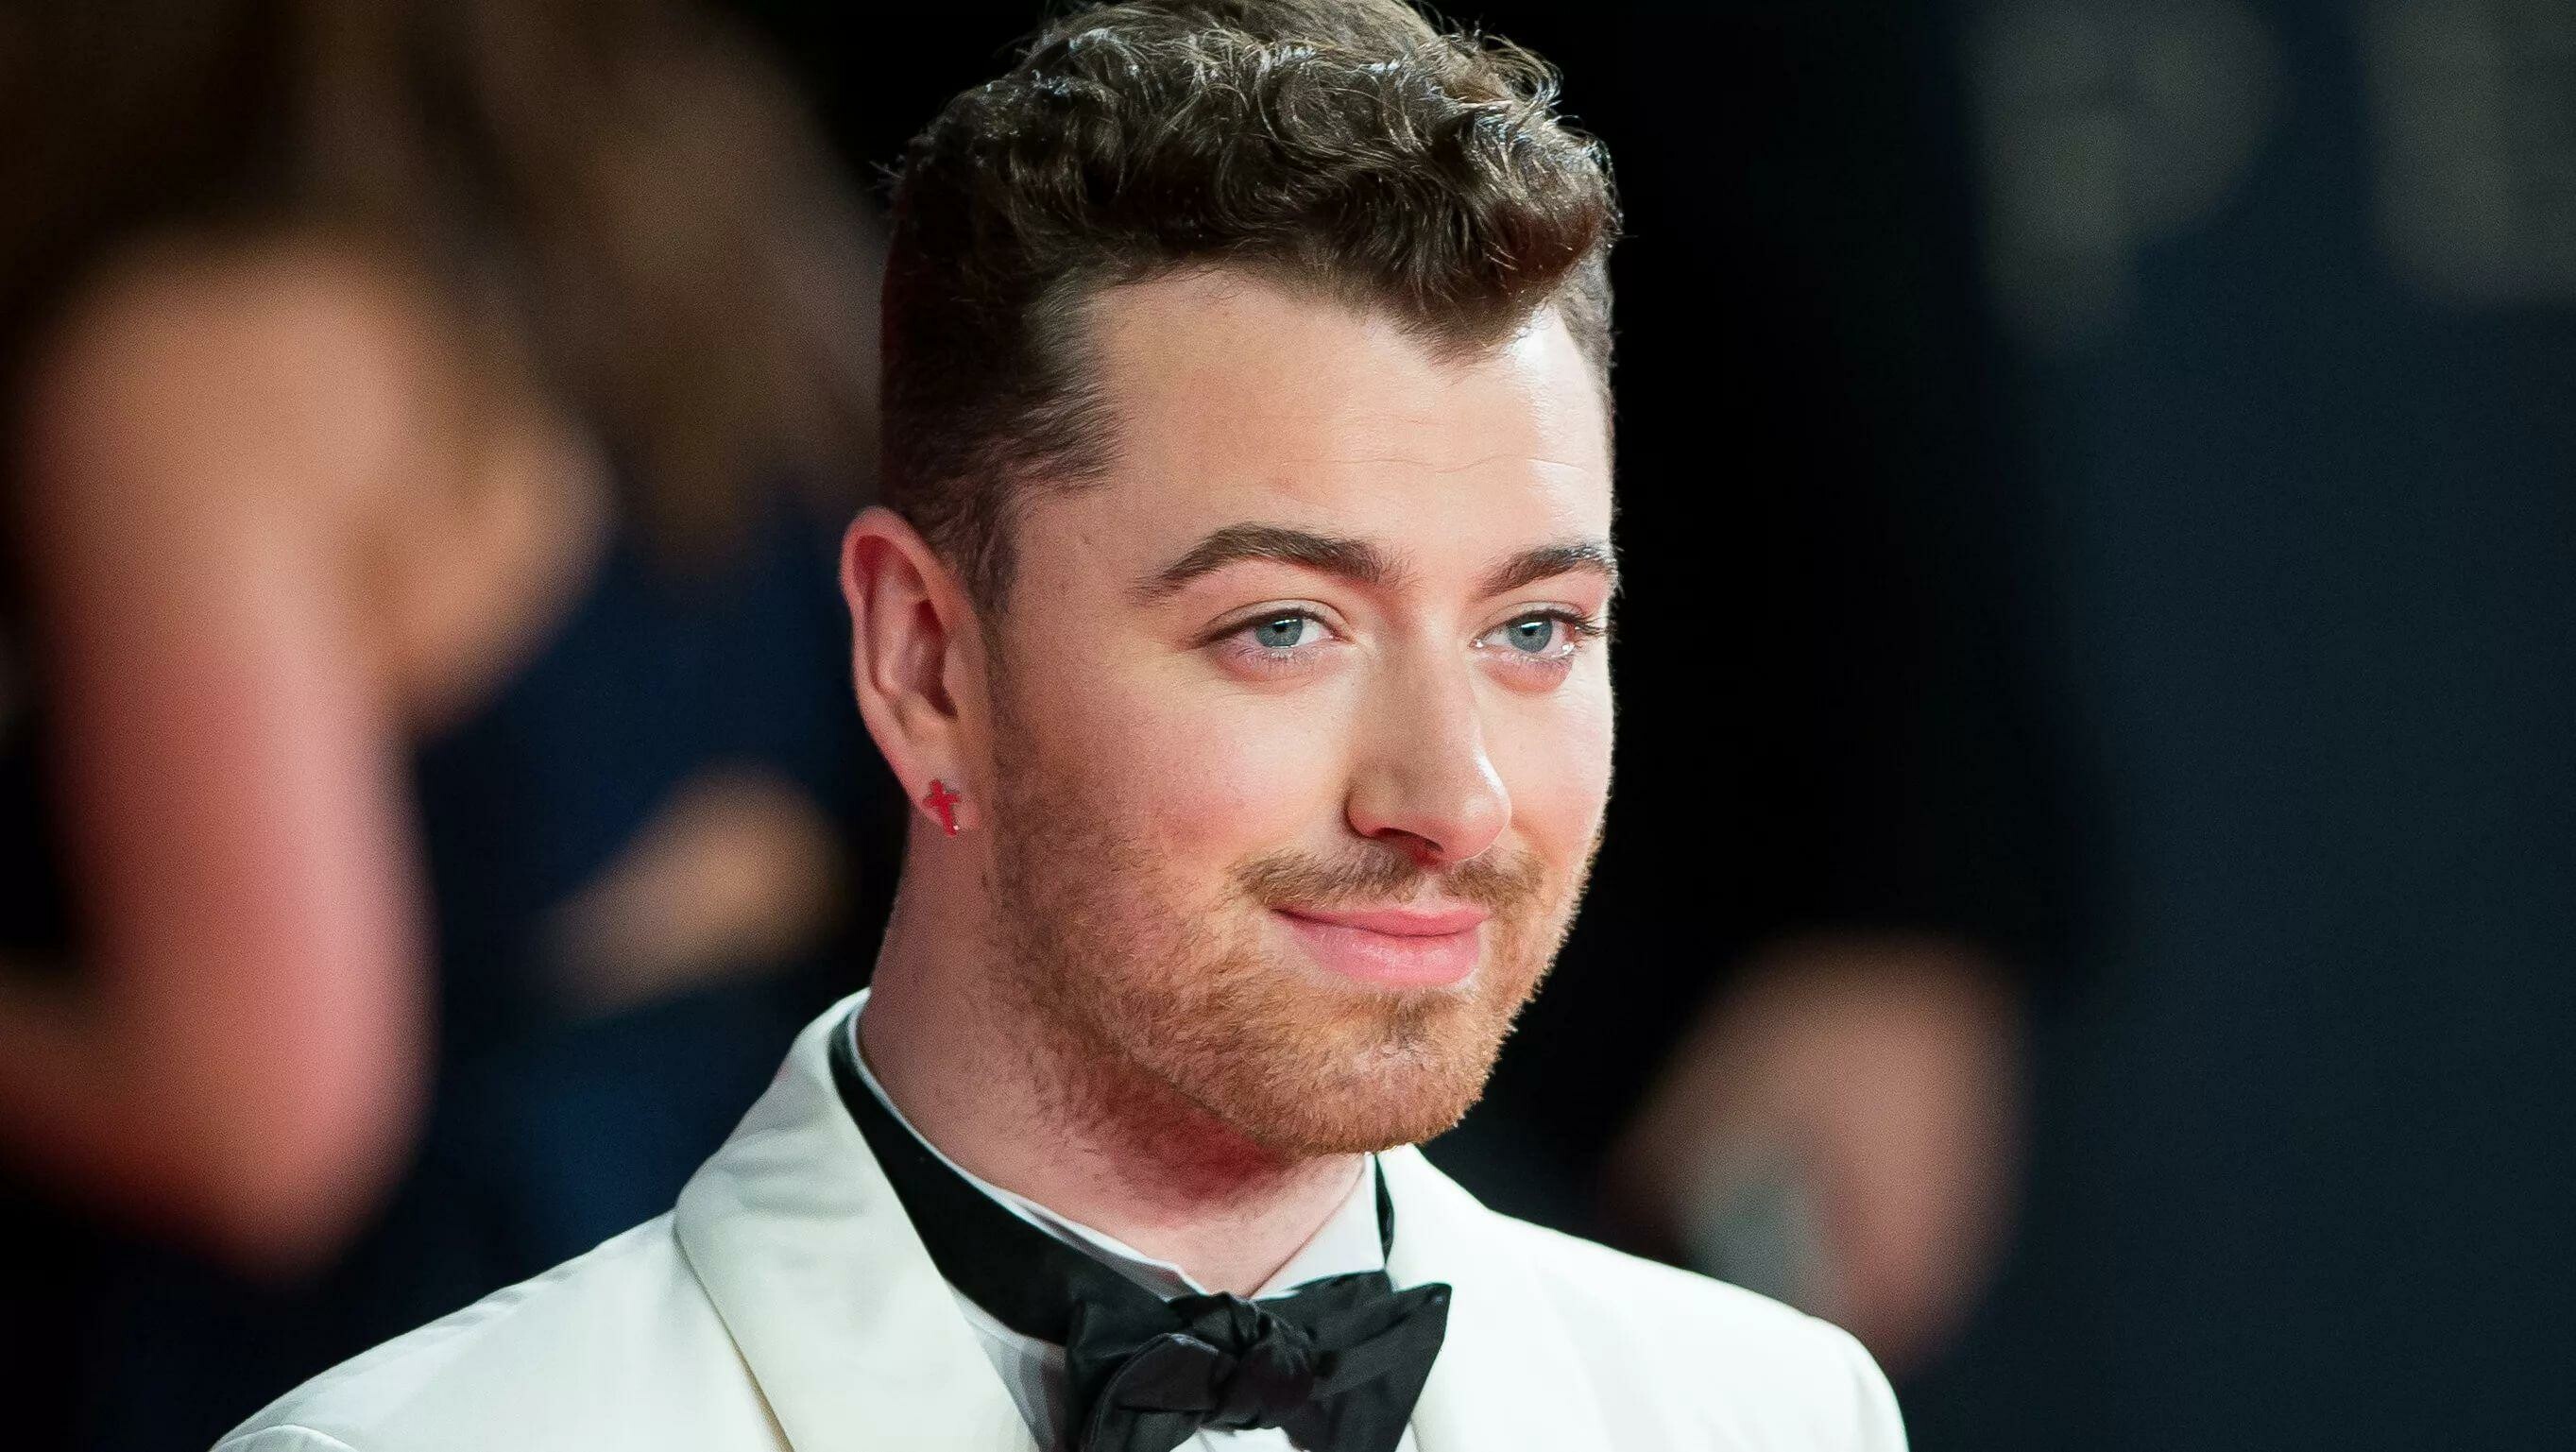 Sam Smith: In the Lonely Hour won Best Pop Vocal Album at the 57th Annual Grammy Awards. 2730x1540 HD Wallpaper.